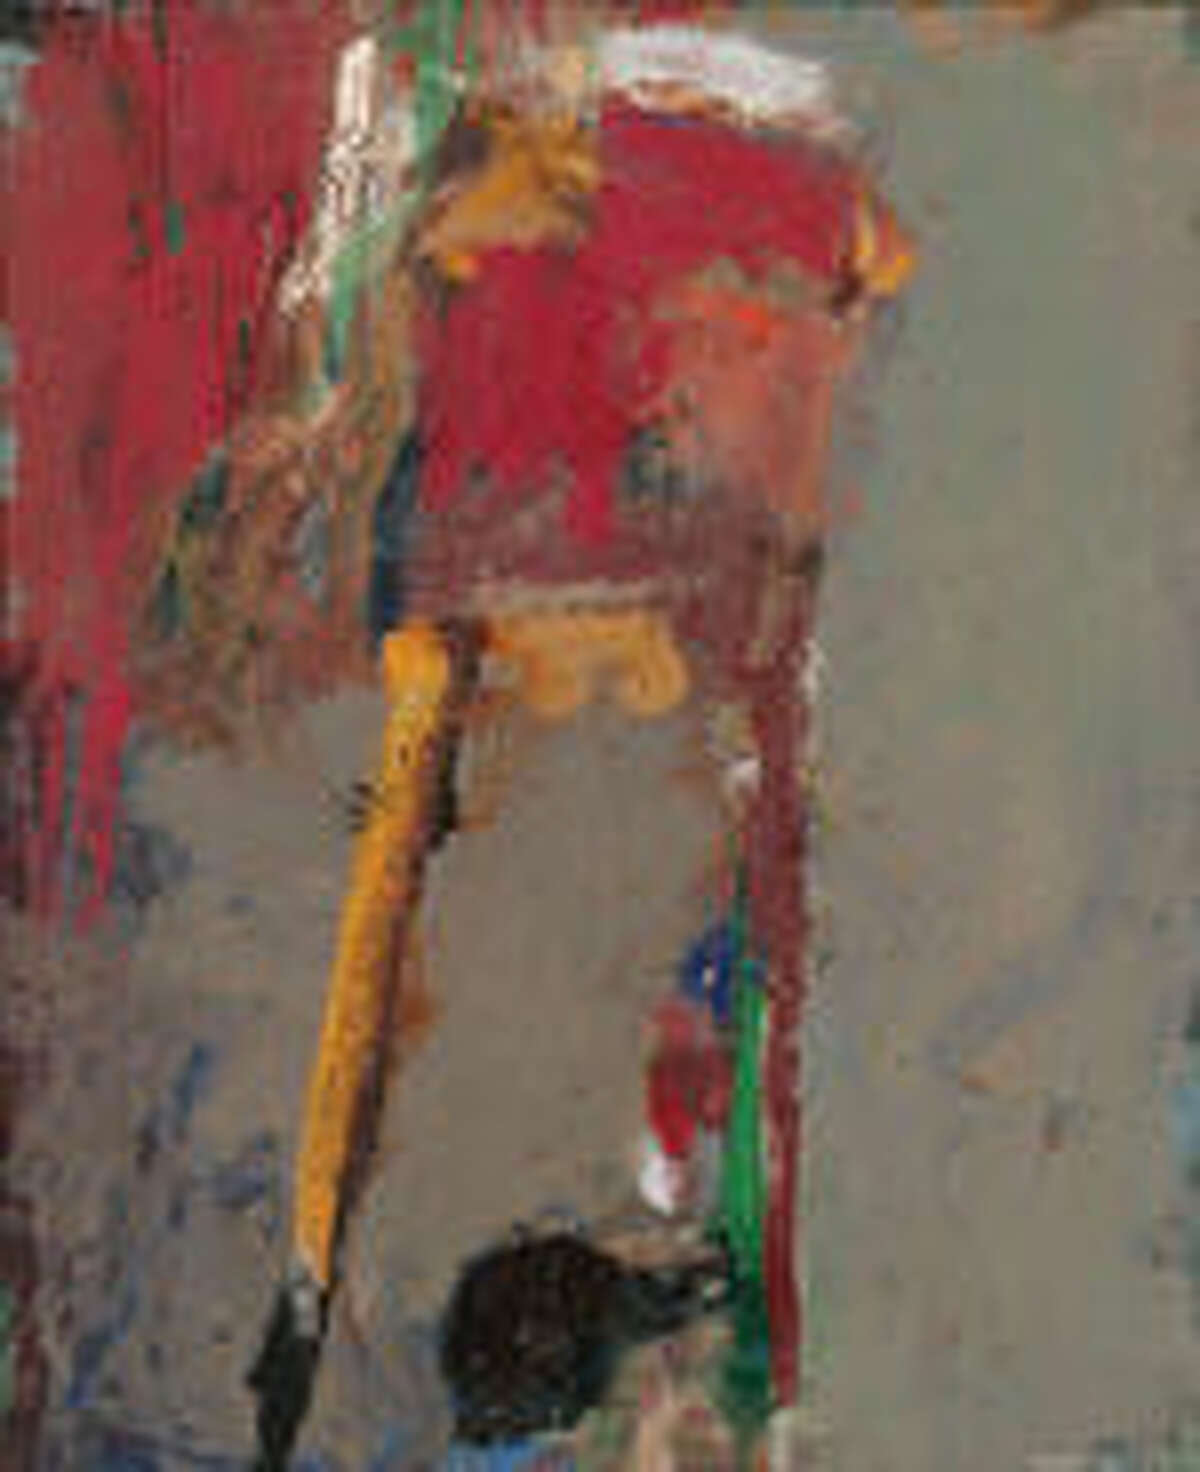 Cavalier Galleries Modern & Contemporary Collection  How about a little something for that bare wall back home? Greenwich’s Cavalier Galleries has just the mid-century answer. Find details at cavaliergalleries.com.  pictured: George McNeil, “Enamoured.” 